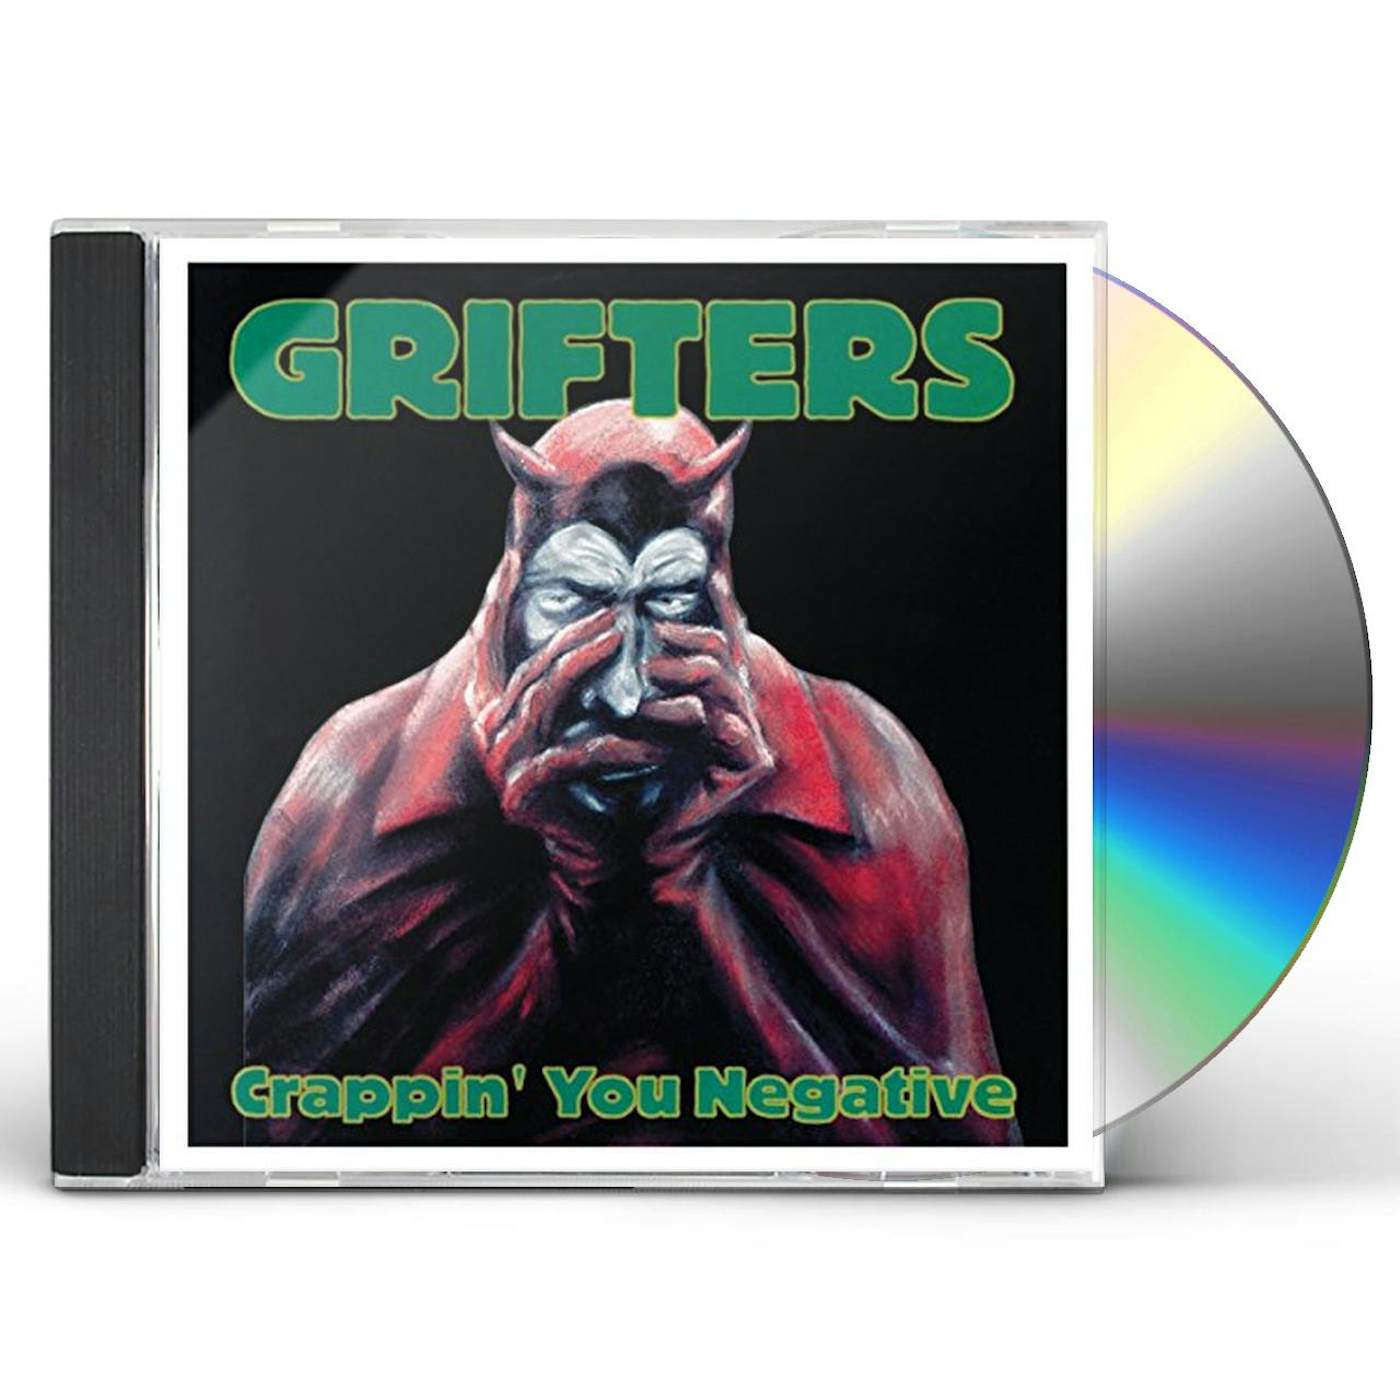 The Grifters CRAPPIN' YOU NEGATIVE CD